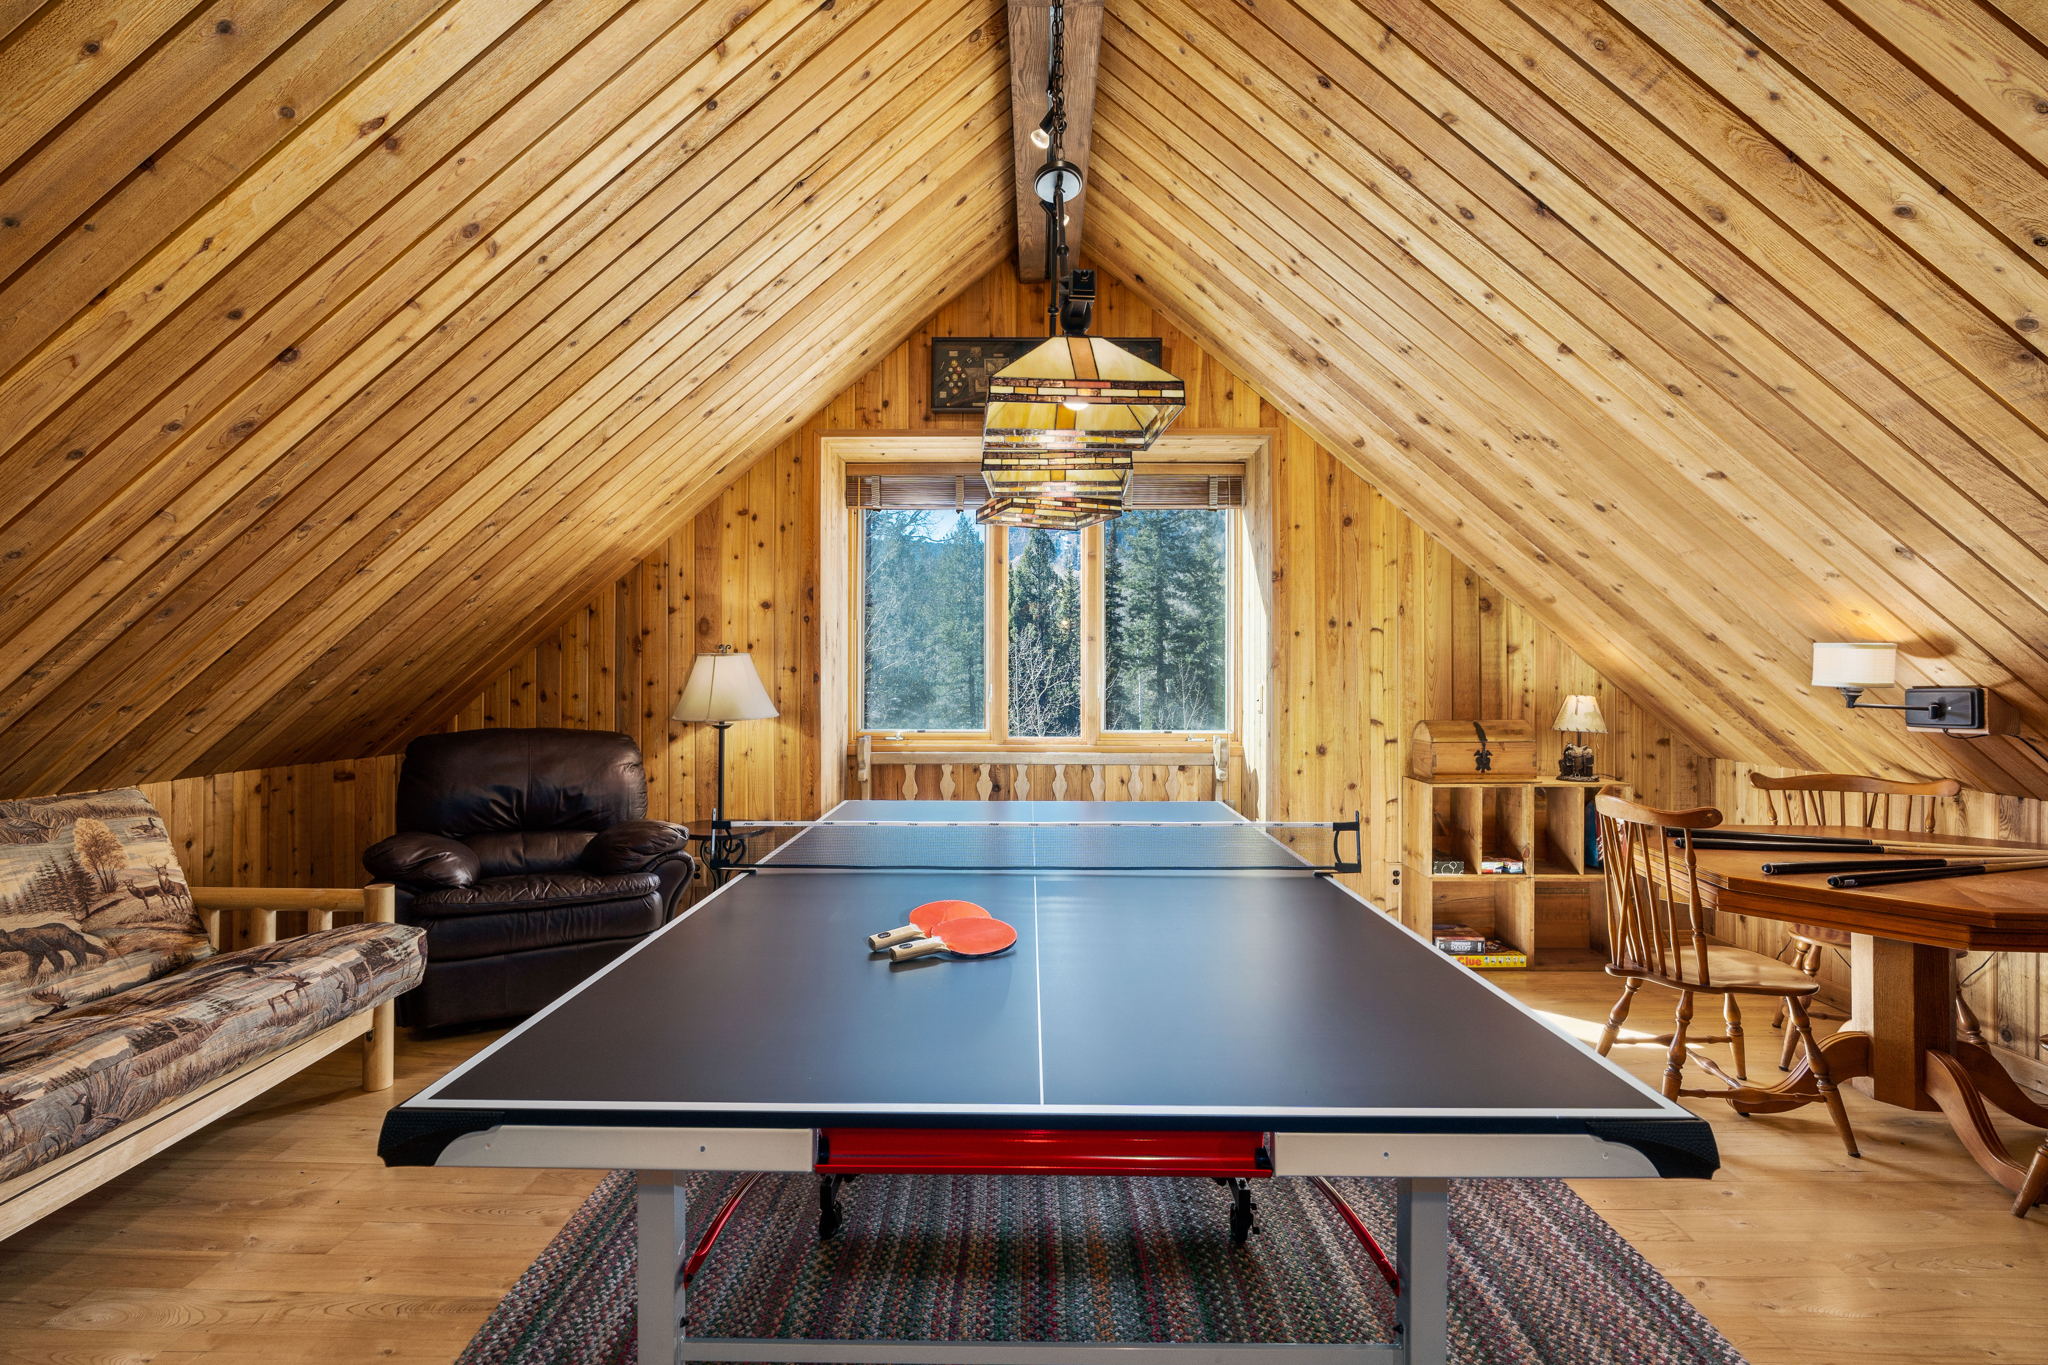 Game Room-ping pong